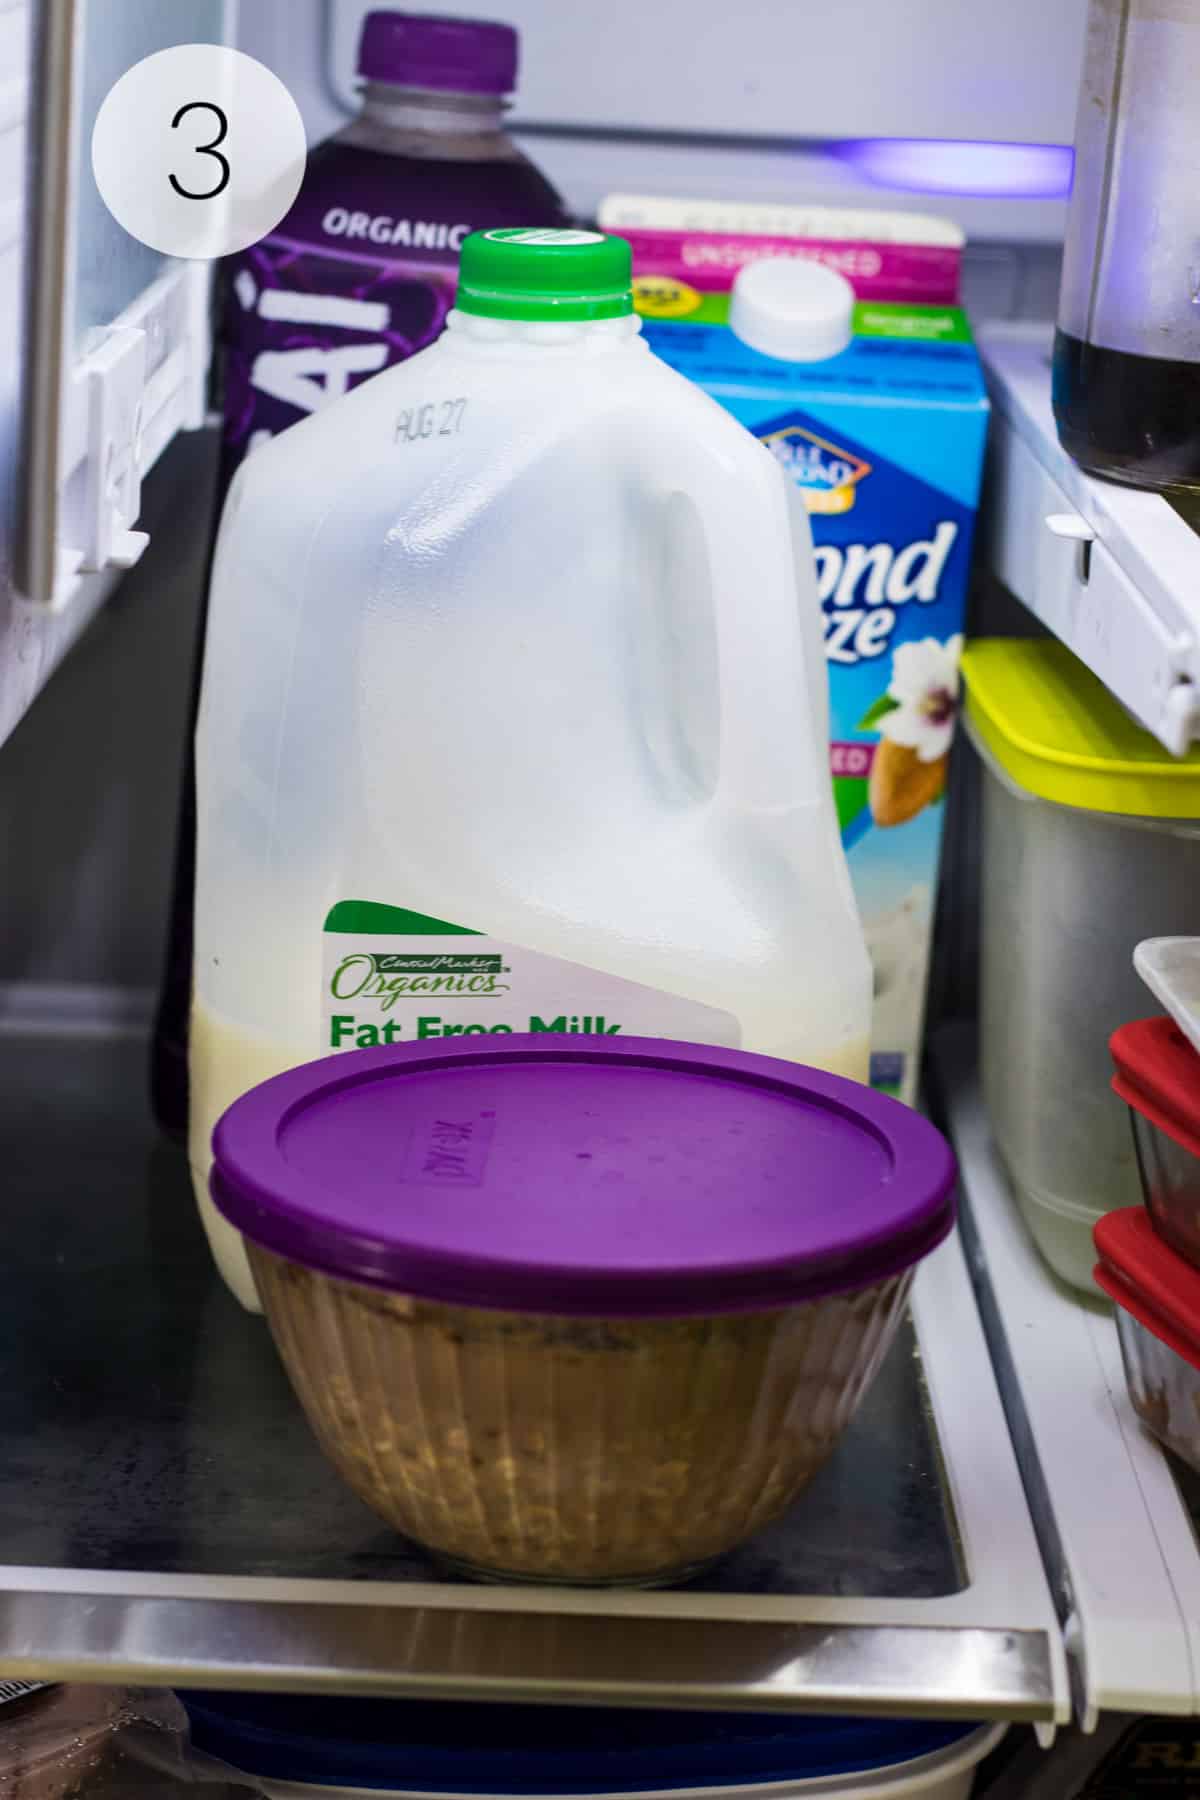 Glass bowl with purple lid containing chocolate and peanut butter overnight oats on shelf in fridge with gallon of milk and other beverages in background.